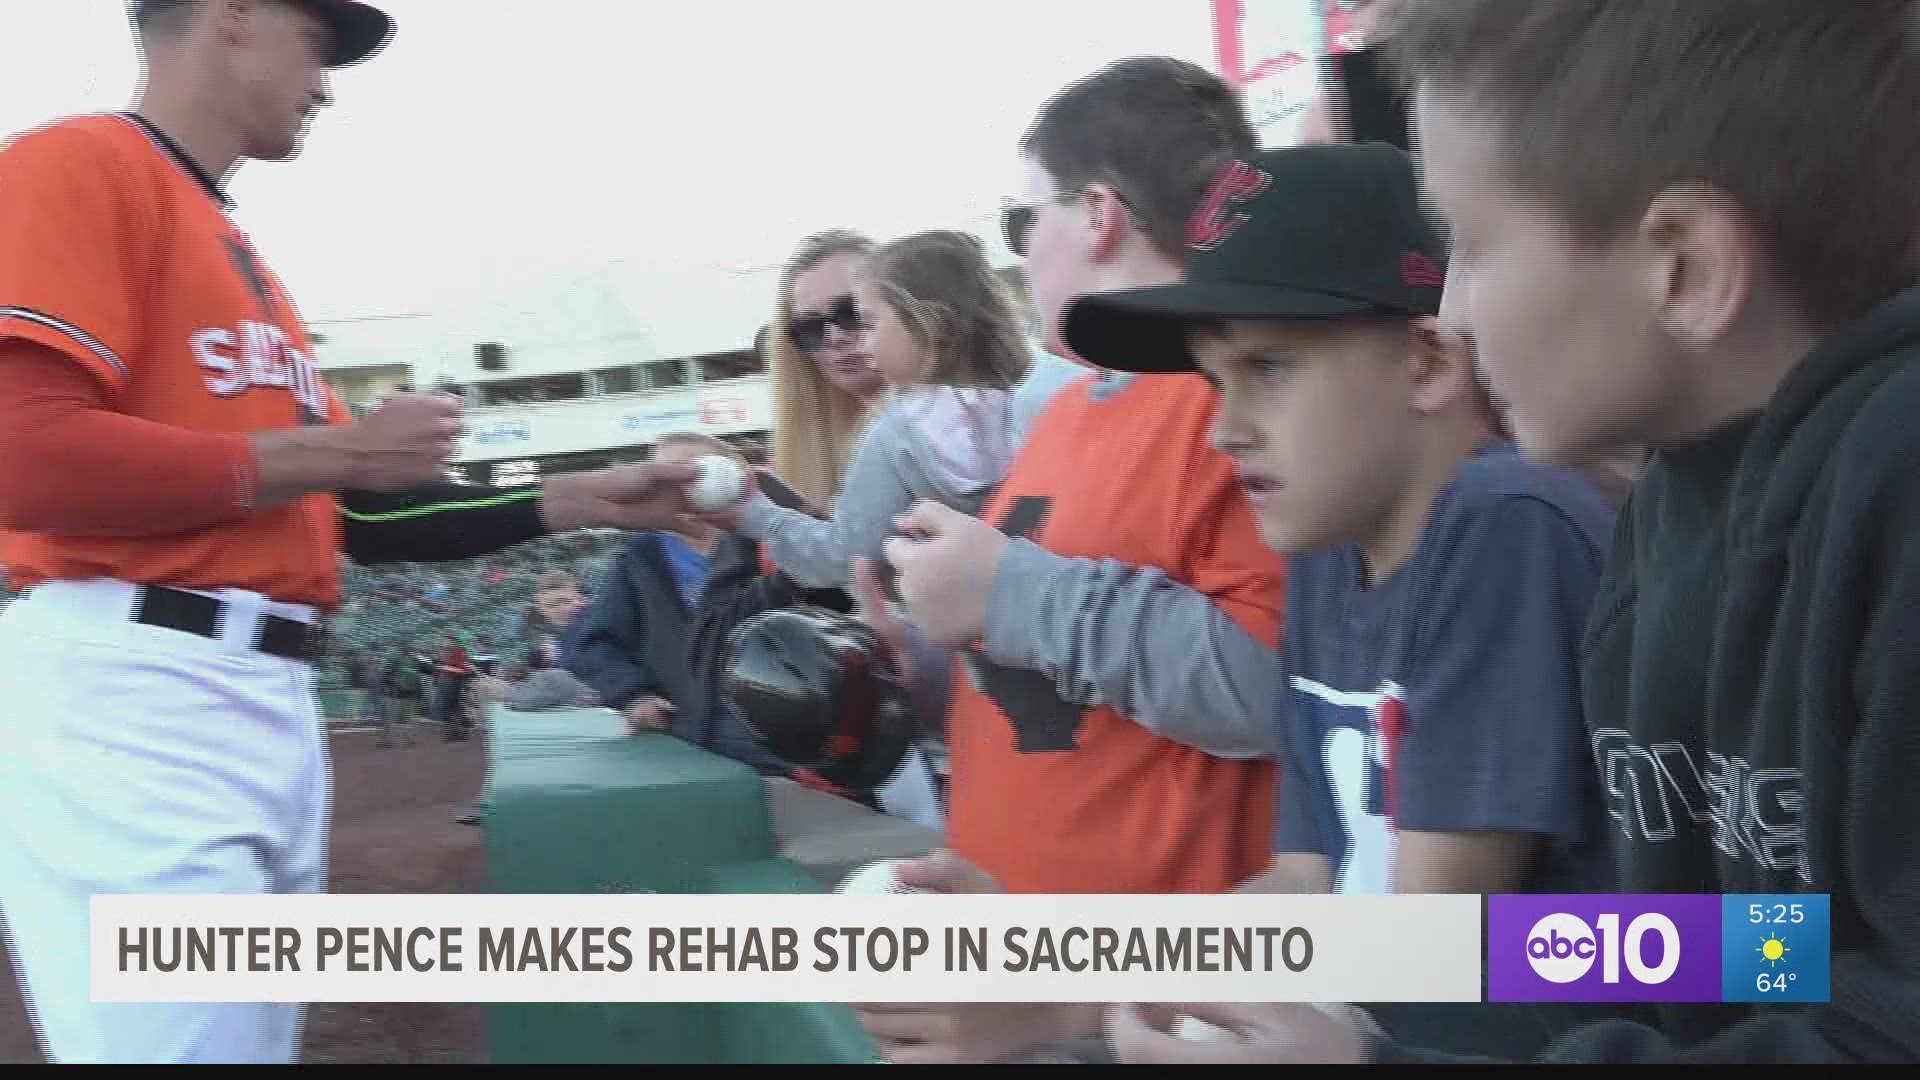 Giants outfielder Hunter Pence is spending the weekend at Raley Field rehabbing from a sprained thumb with the River Cats.